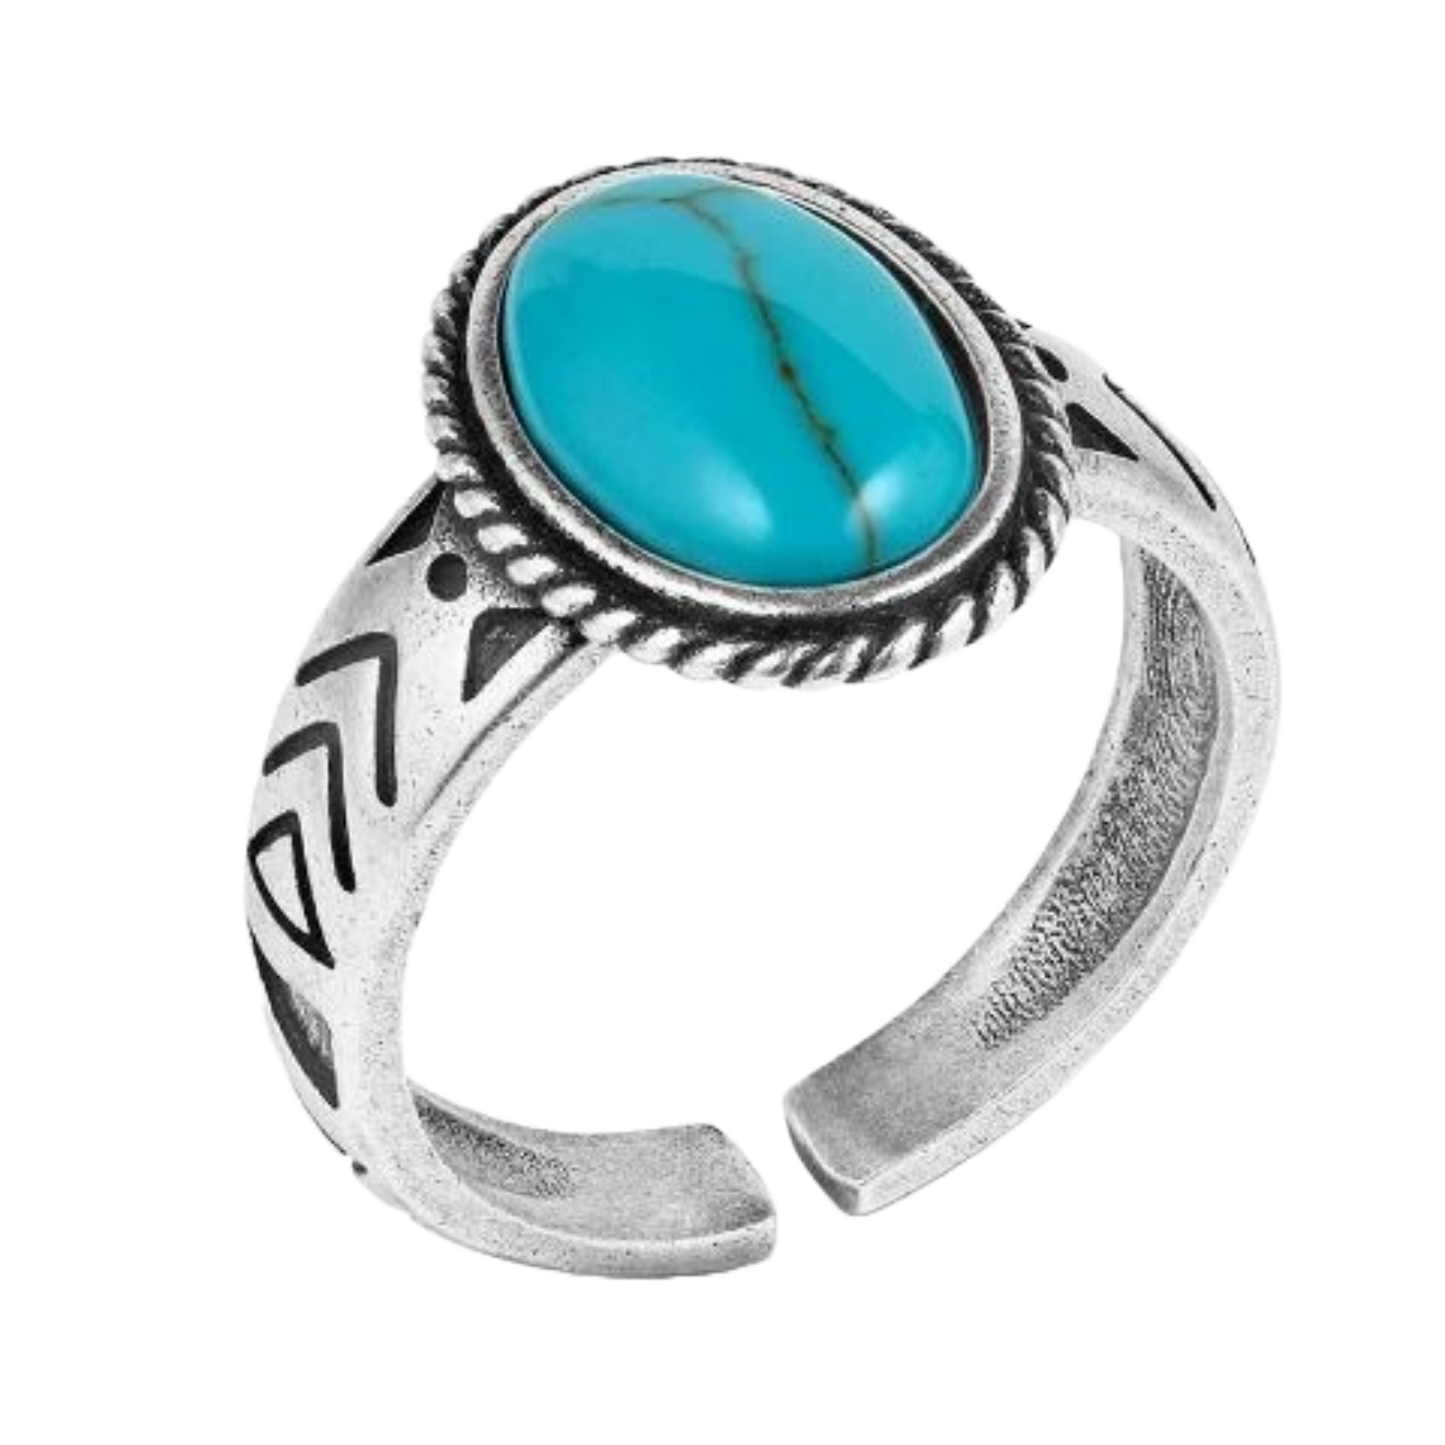 Montana Silversmiths Ladies Uncovered Beauty Turquoise & Silver Ring RG5810